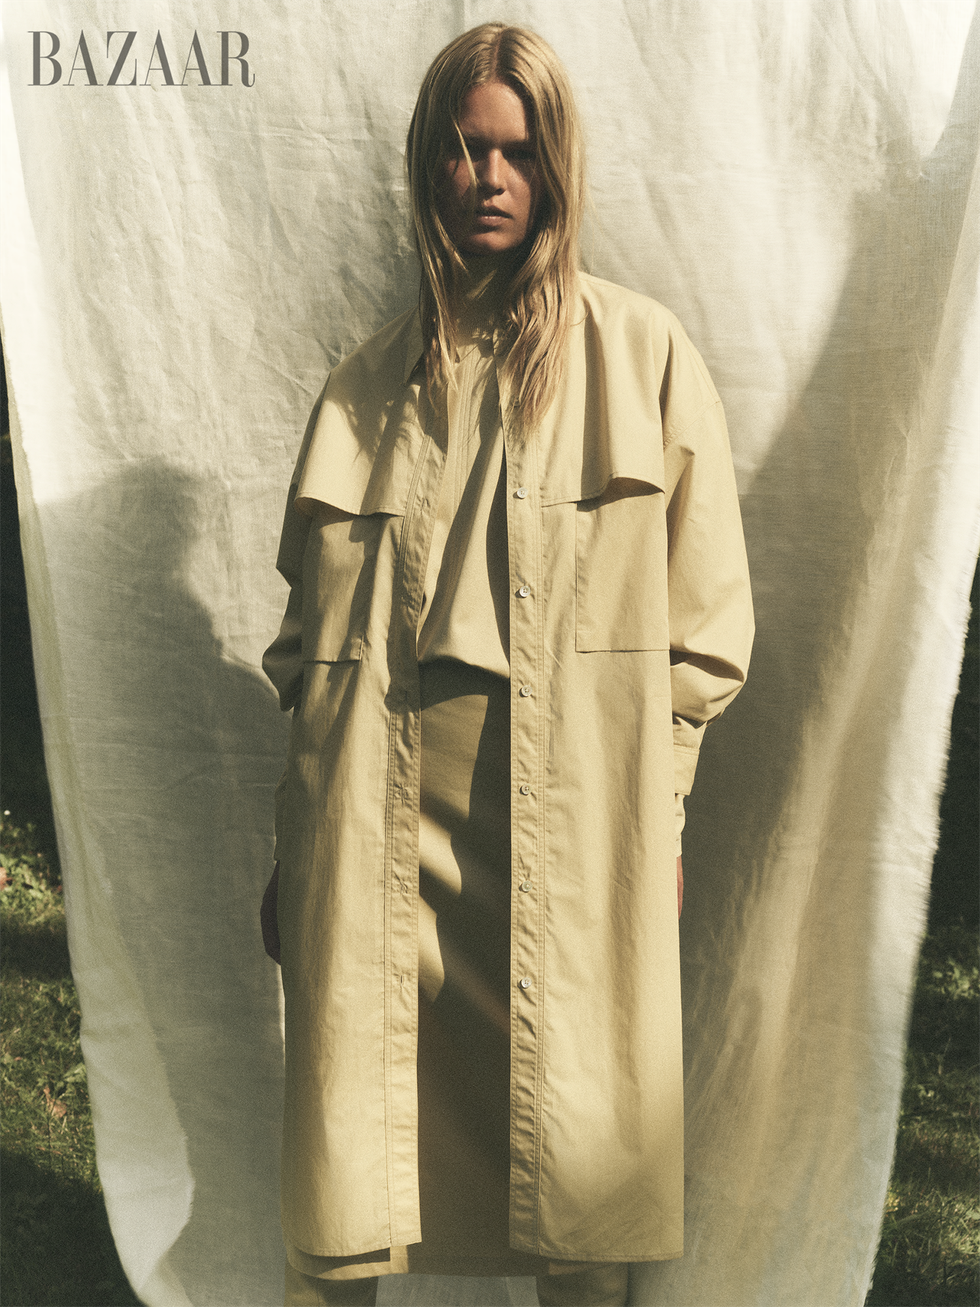 into the light minimalist outerwear, soft floral prints, and ruffled accents dresses, lemaire